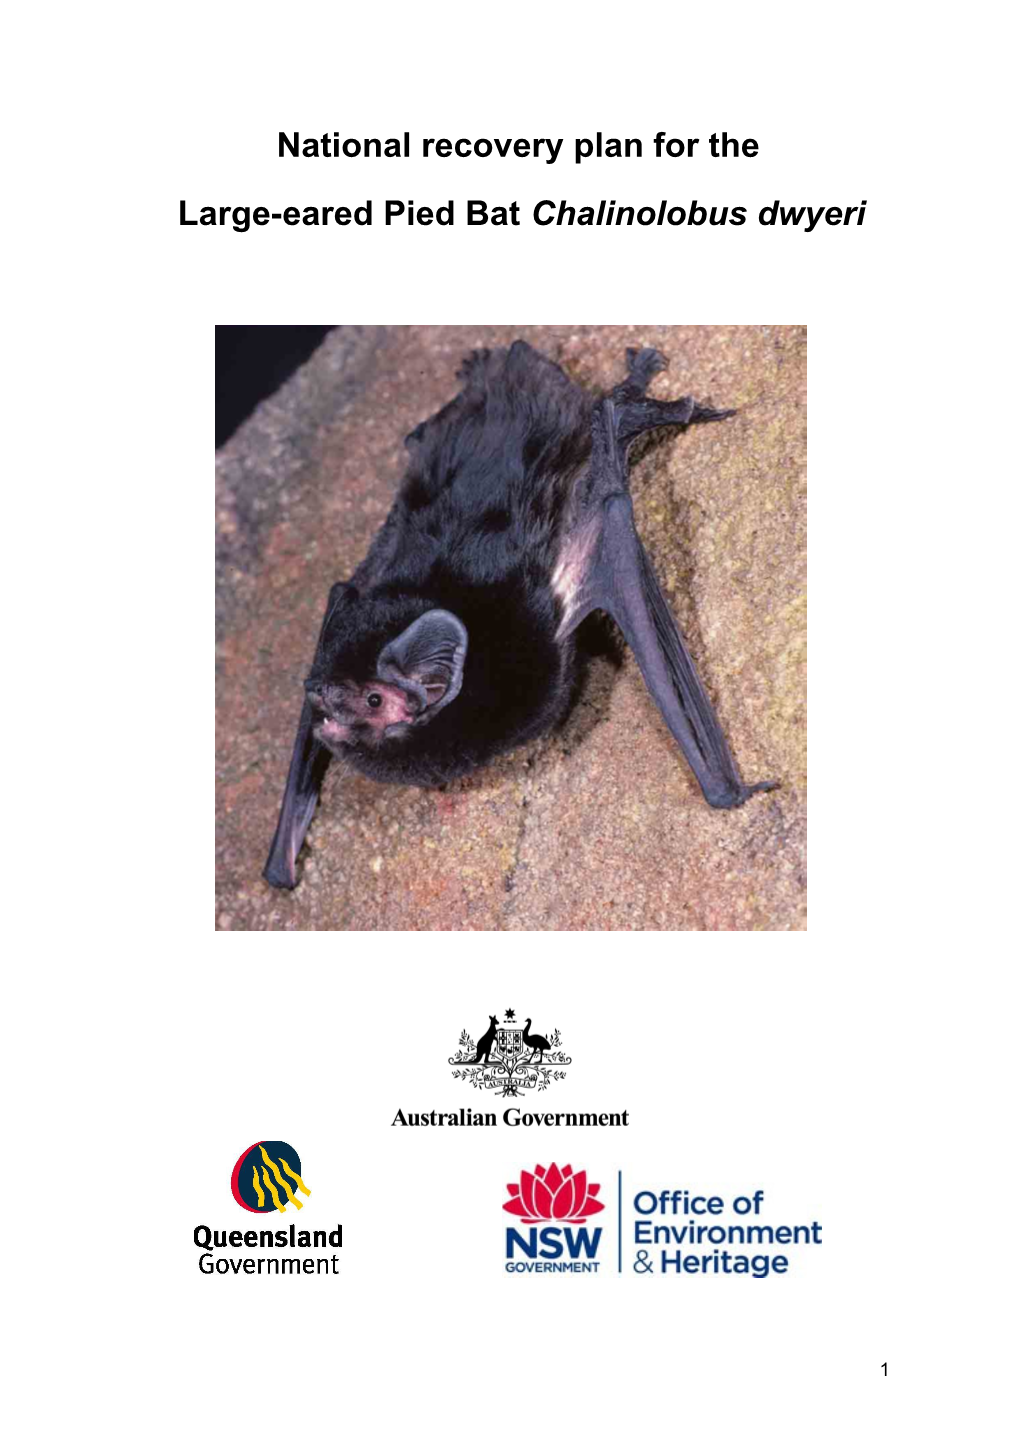 National Recovery Plan for the Large-Eared Pied Bat Chalinolobus Dwyeri